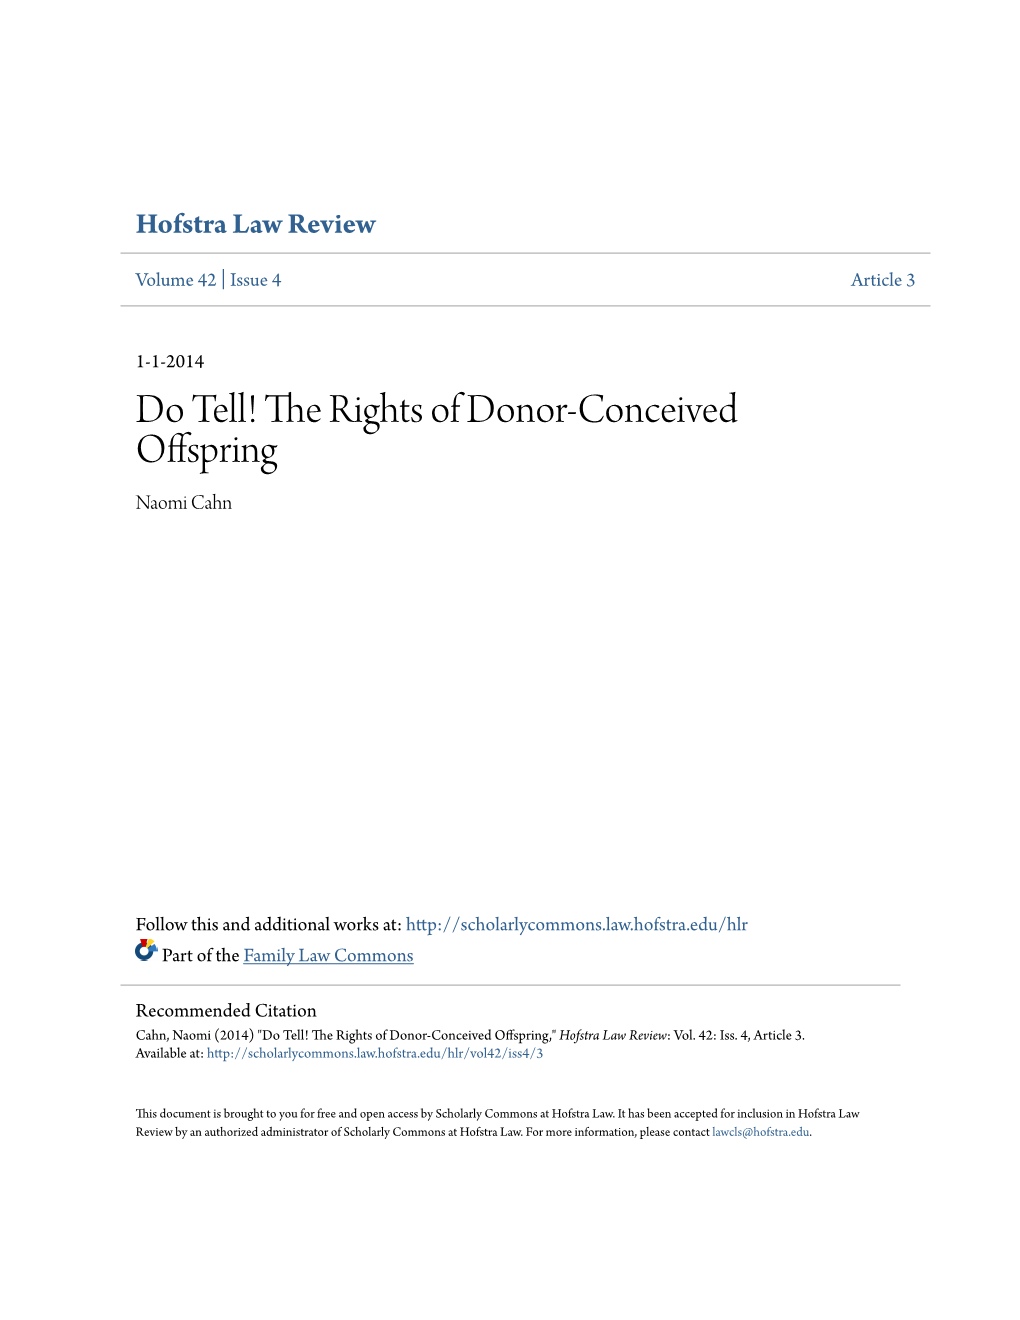 The Rights of Donor-Conceived Offspring Naomi Cahn